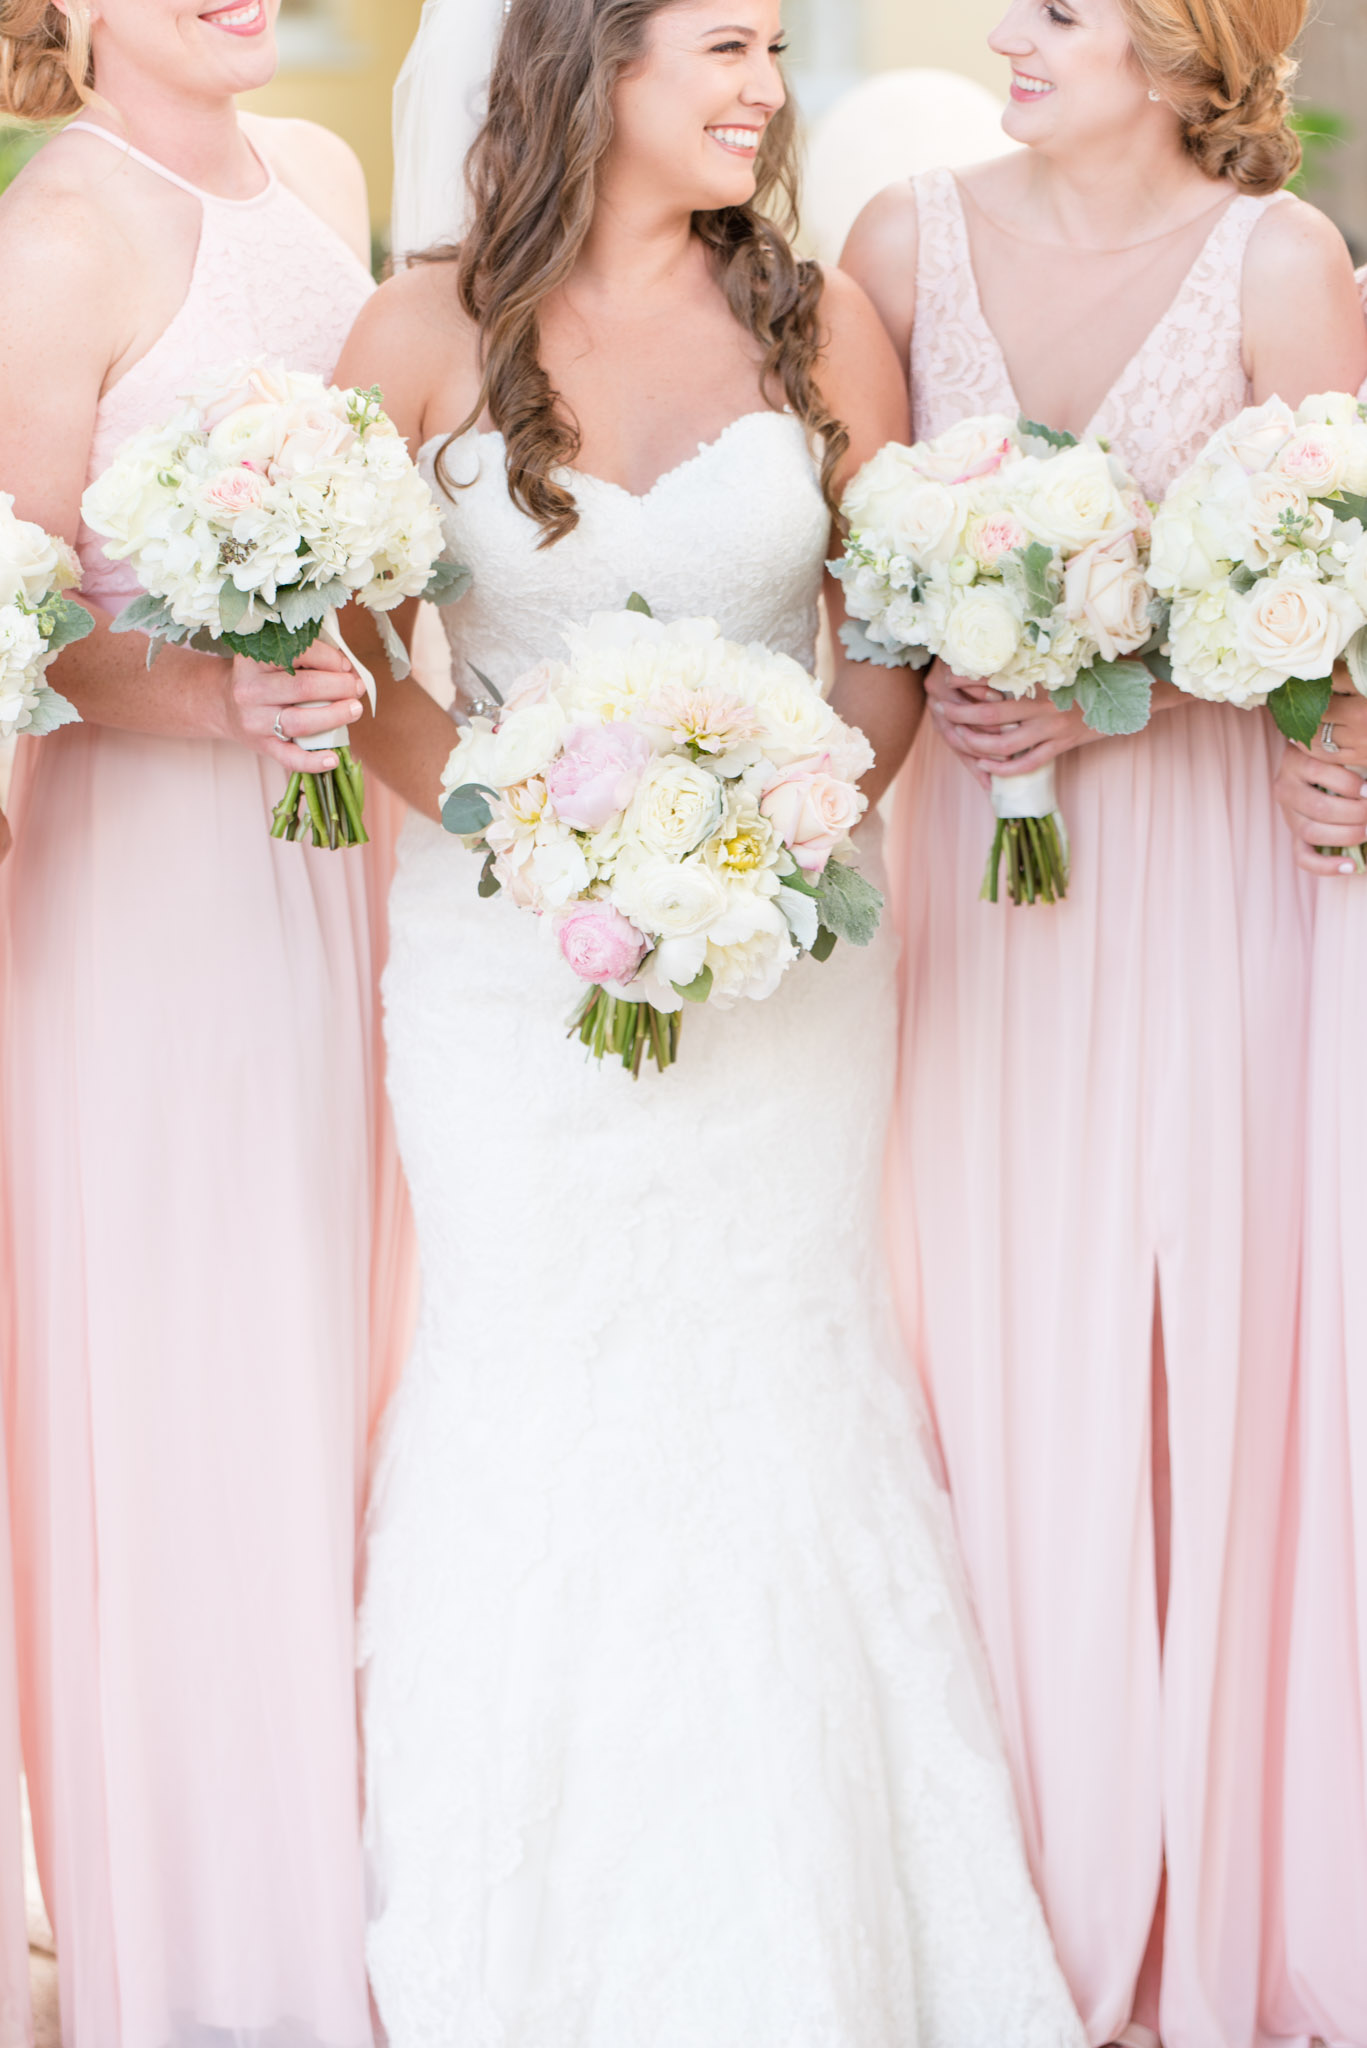 Bride and bridesmaids smile and hold flowers